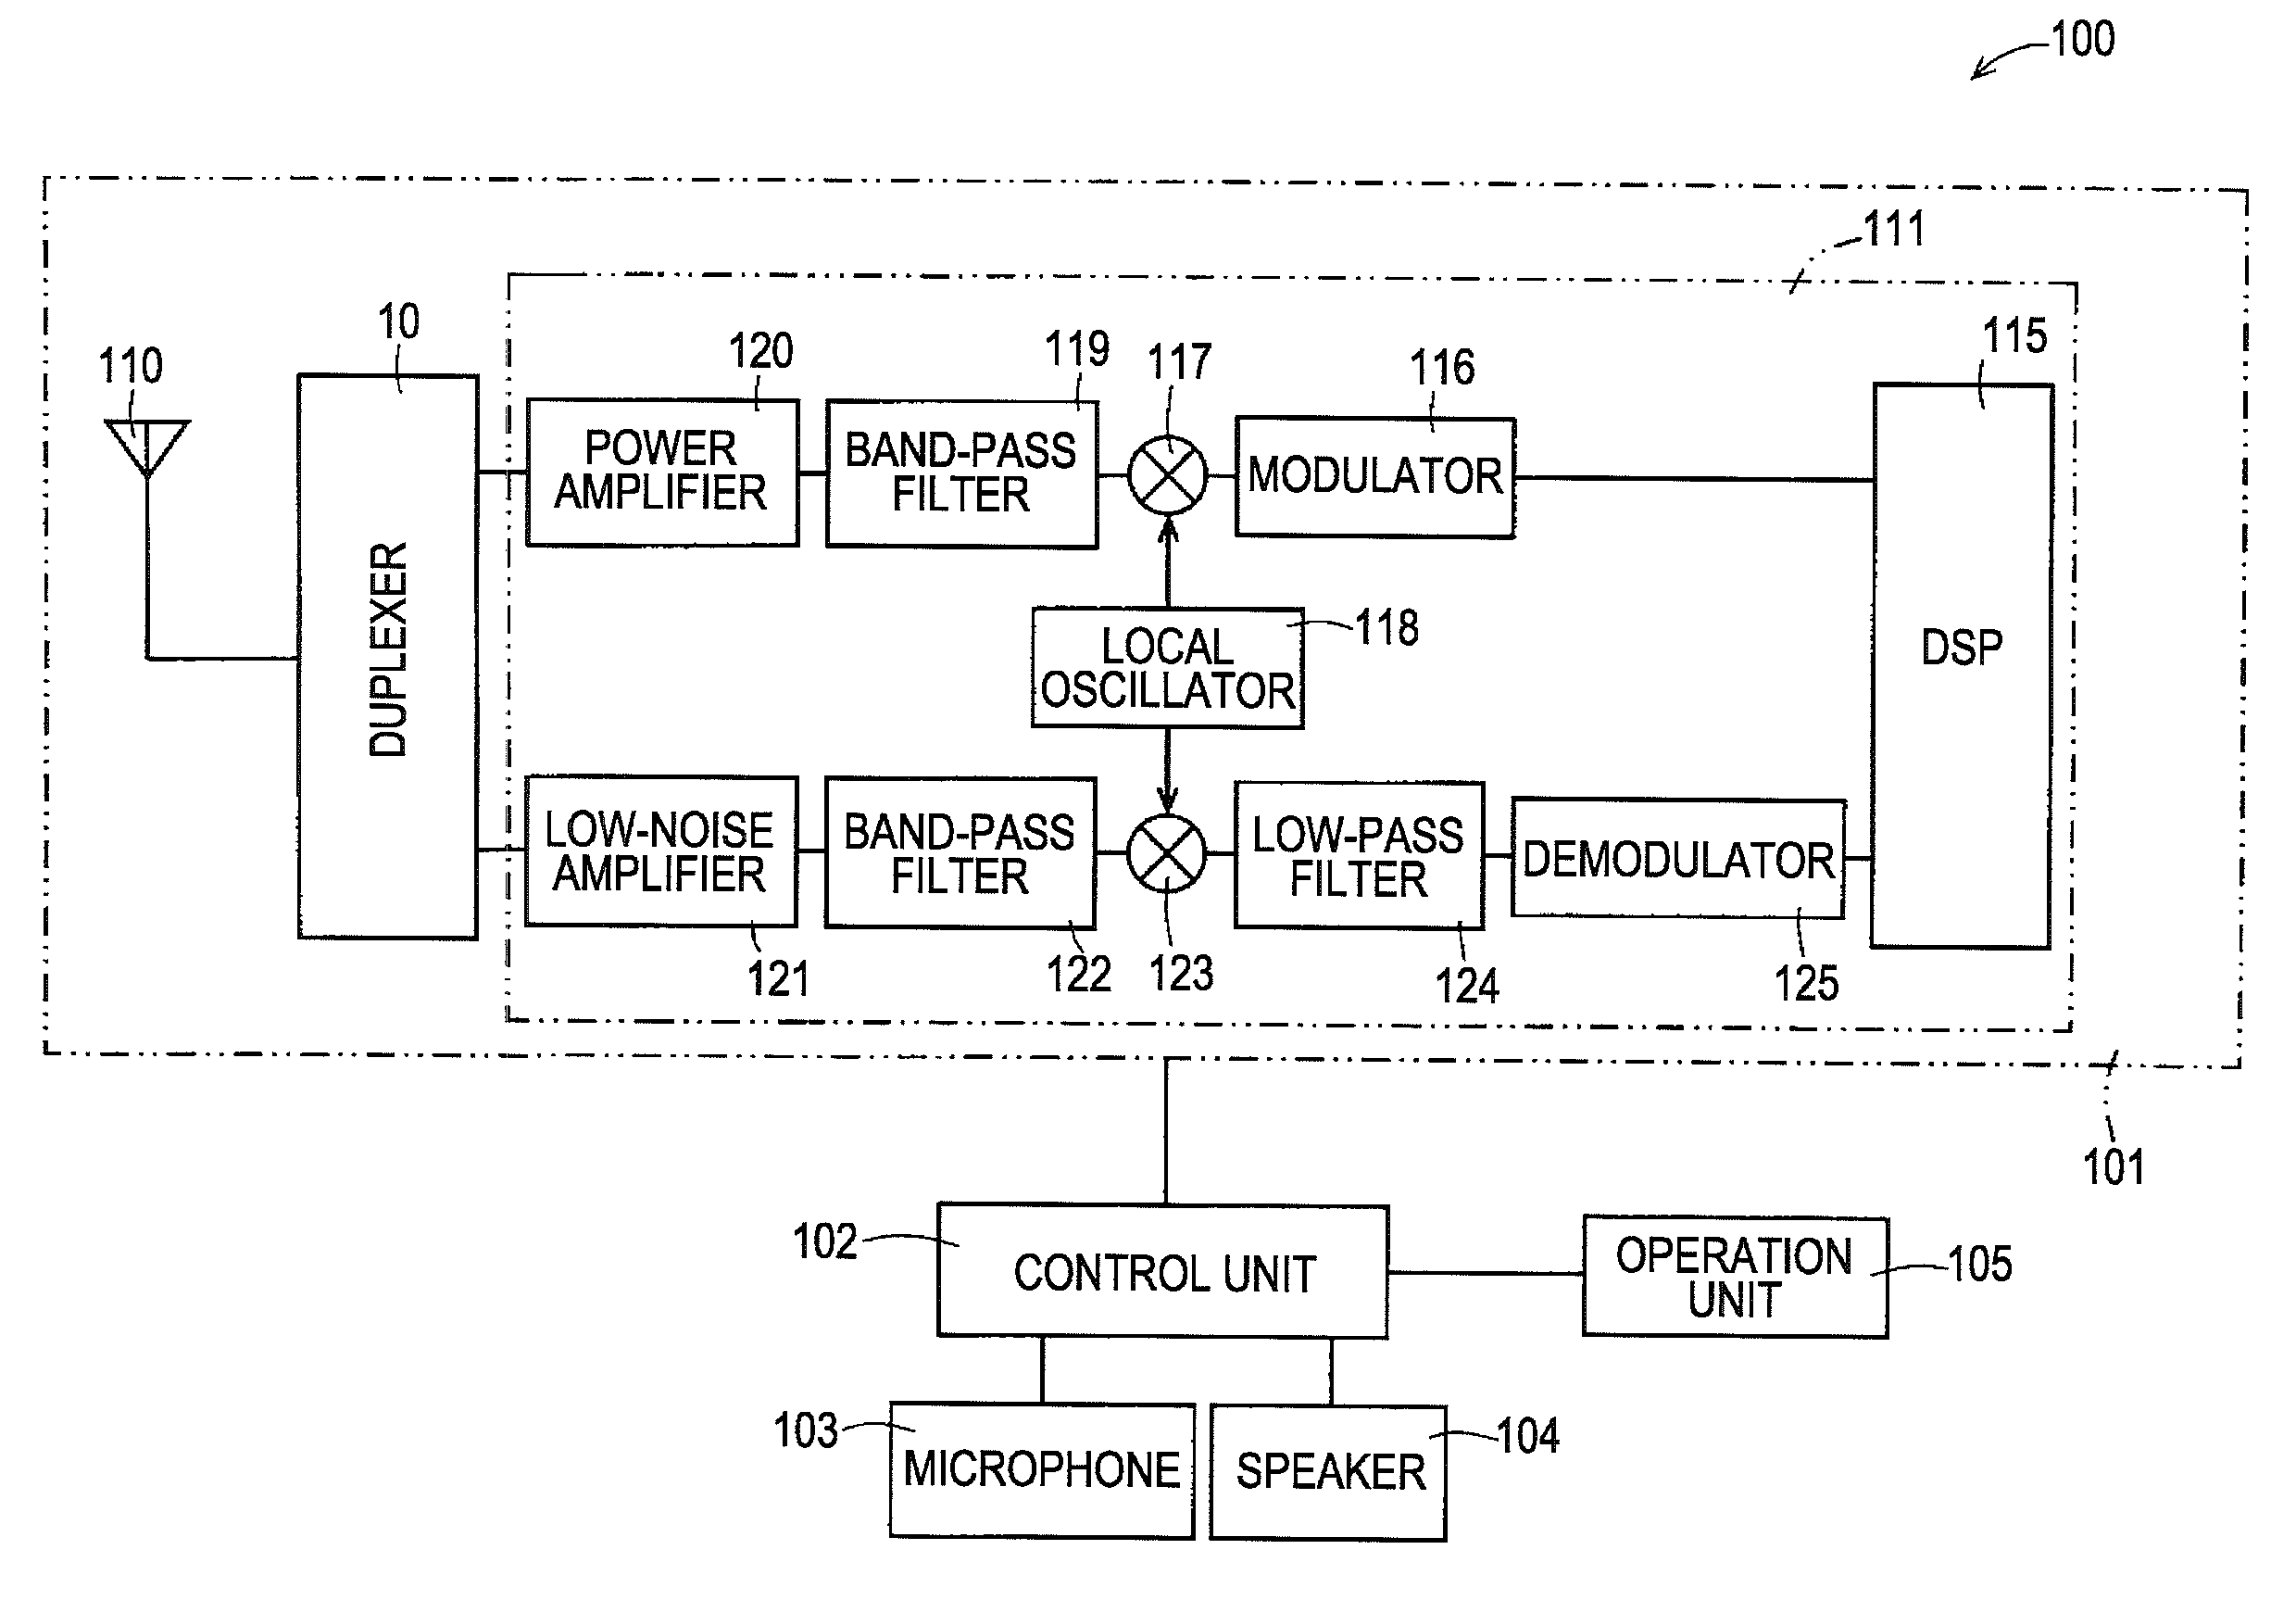 Demultiplexer and communication device